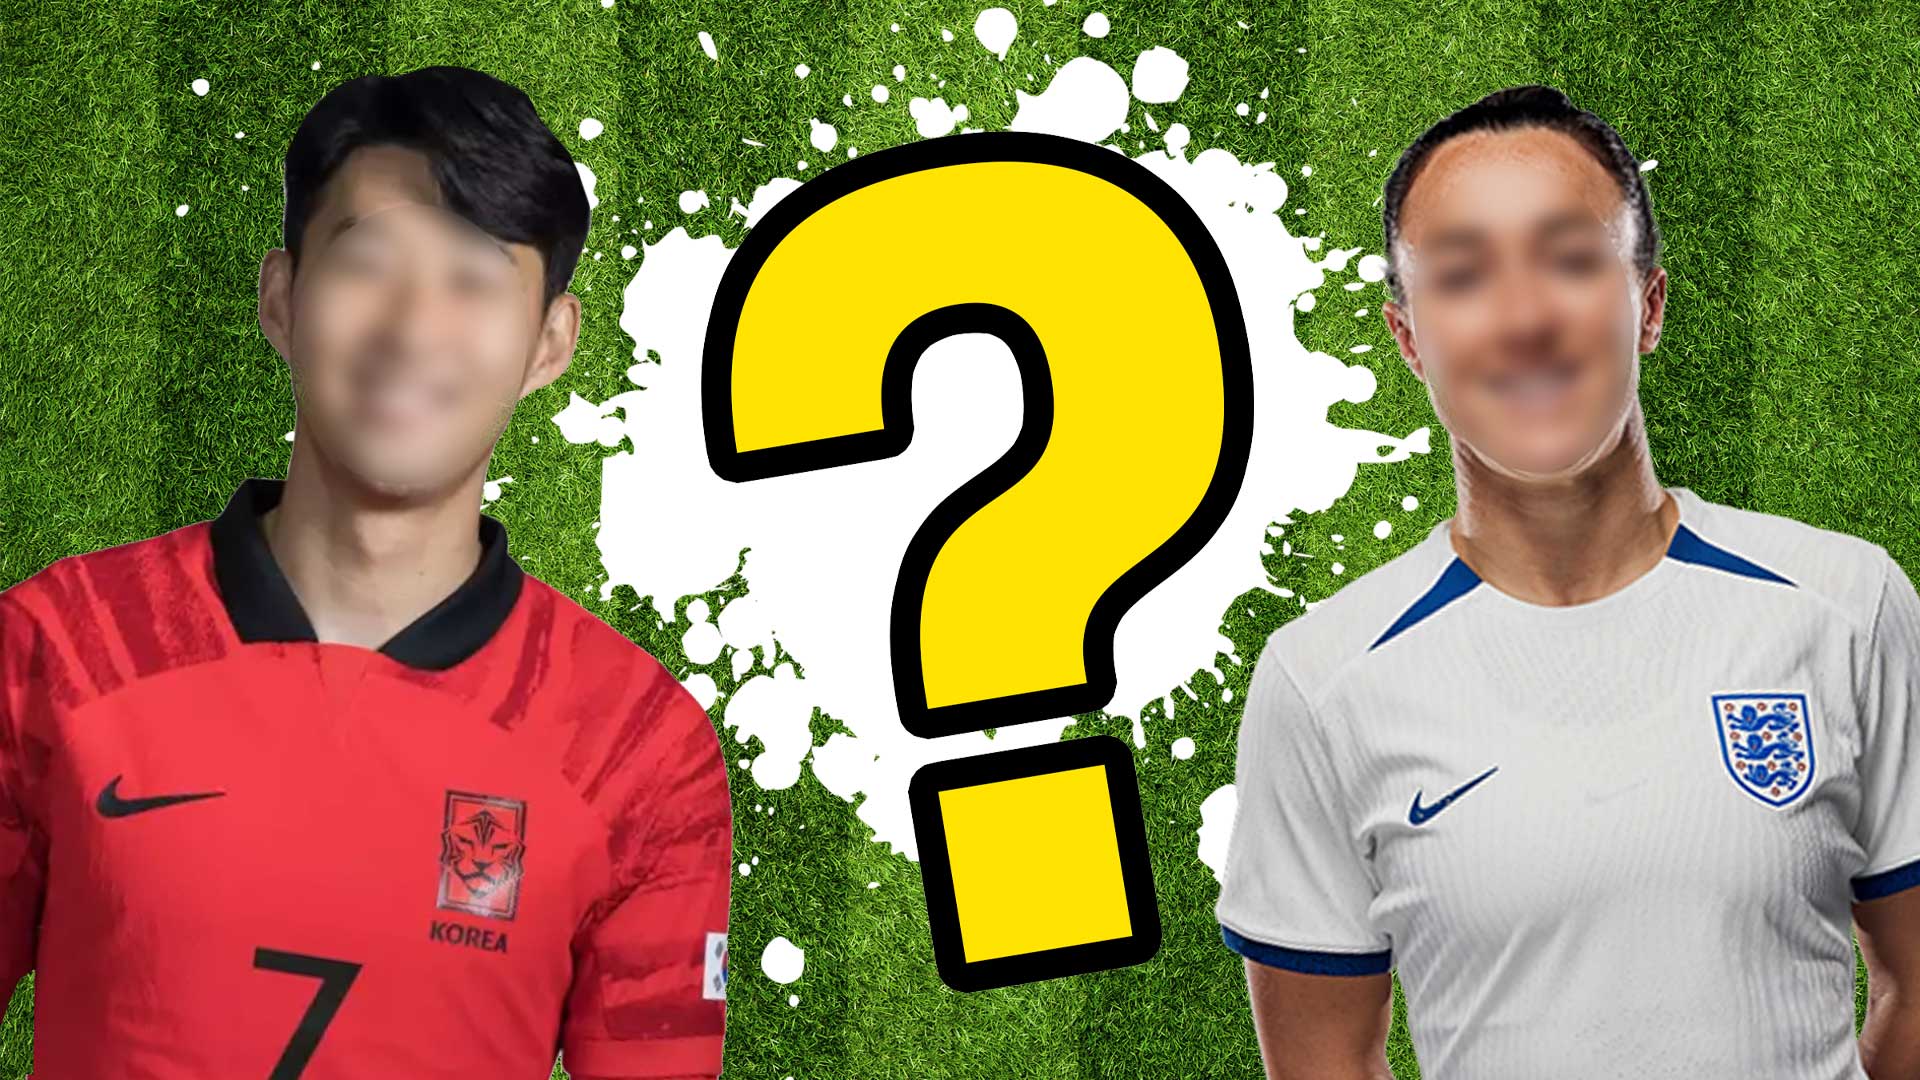 Guess if the player played for the club, football quiz